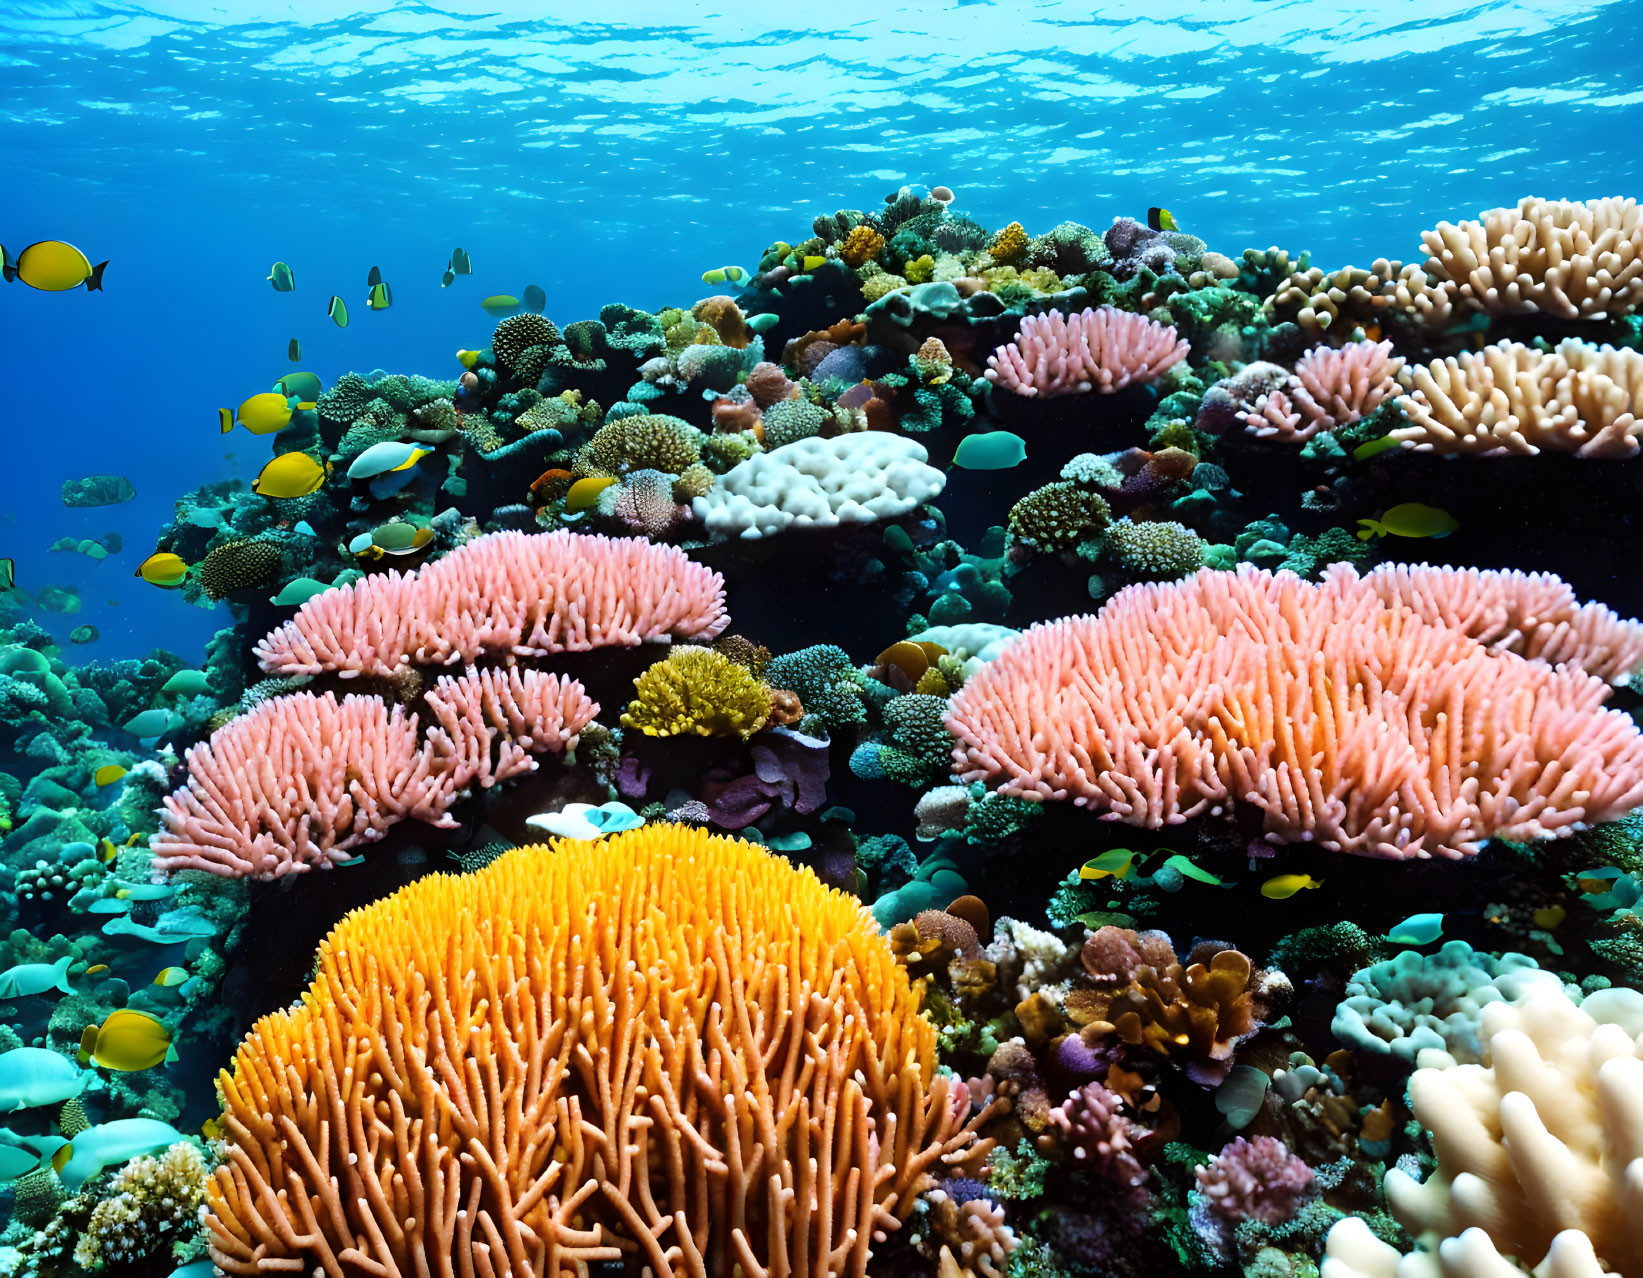 Colorful Coral Reef with Diverse Marine Life in Pink and Orange Hues